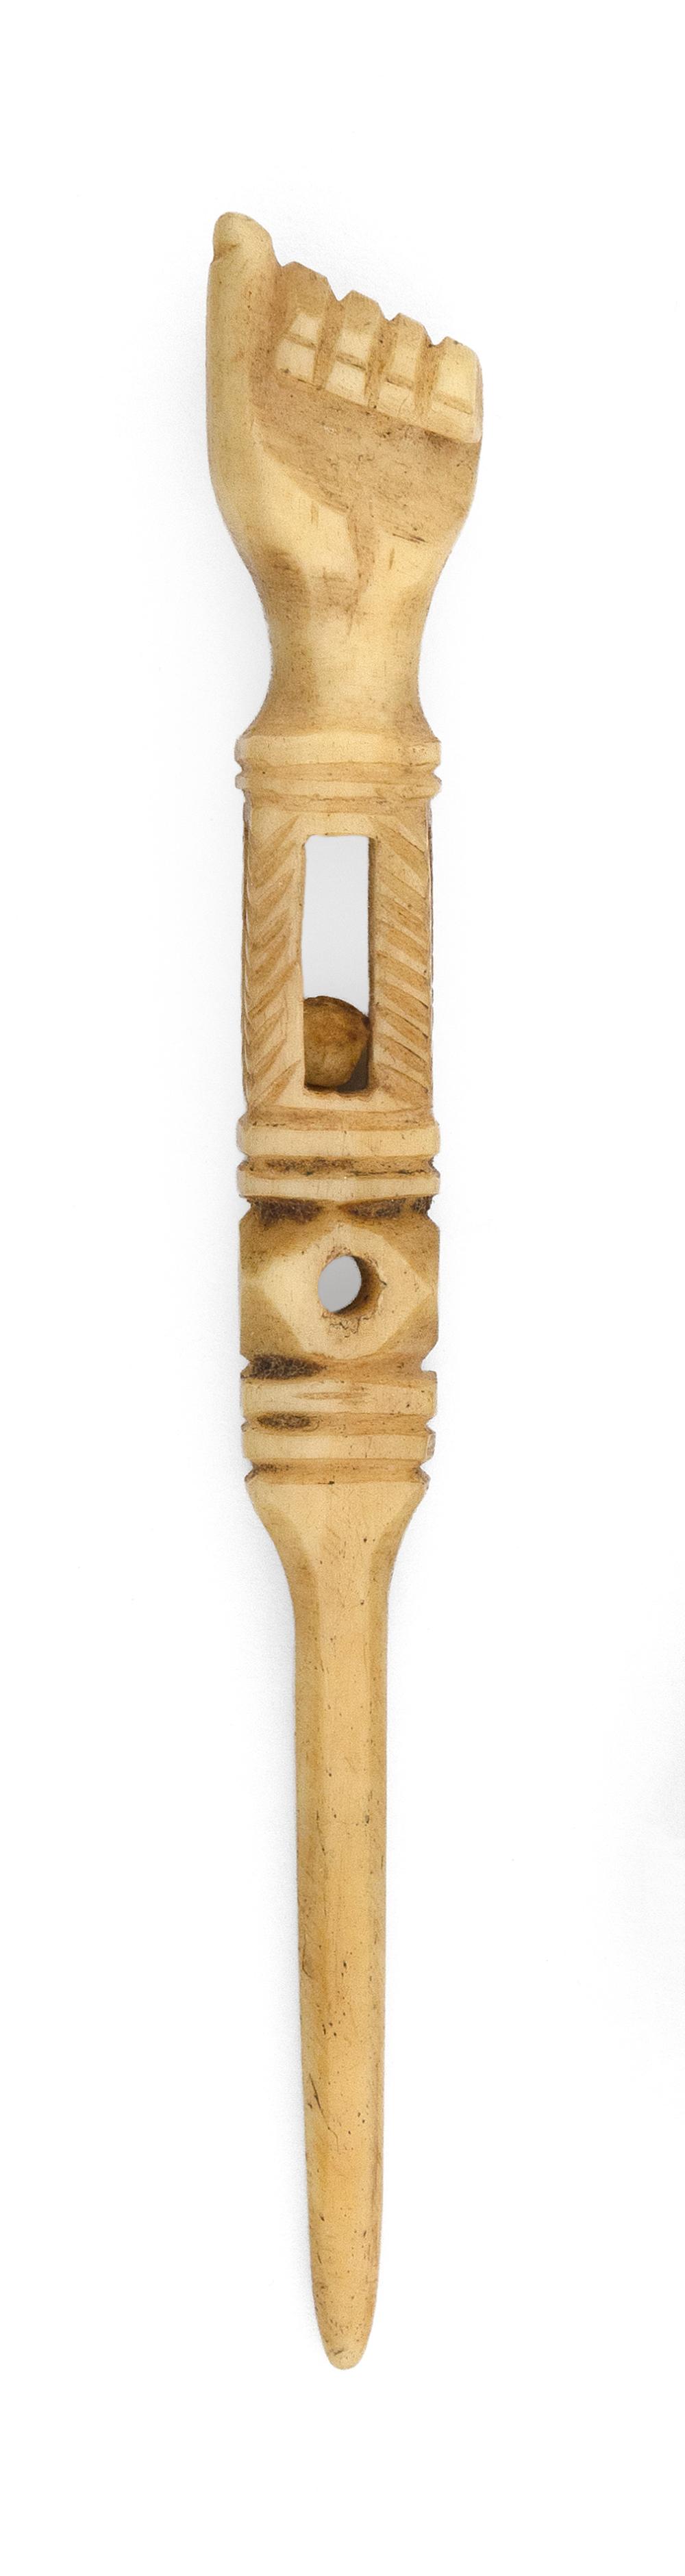 EXTENSIVELY CARVED WHALE IVORY 34f012